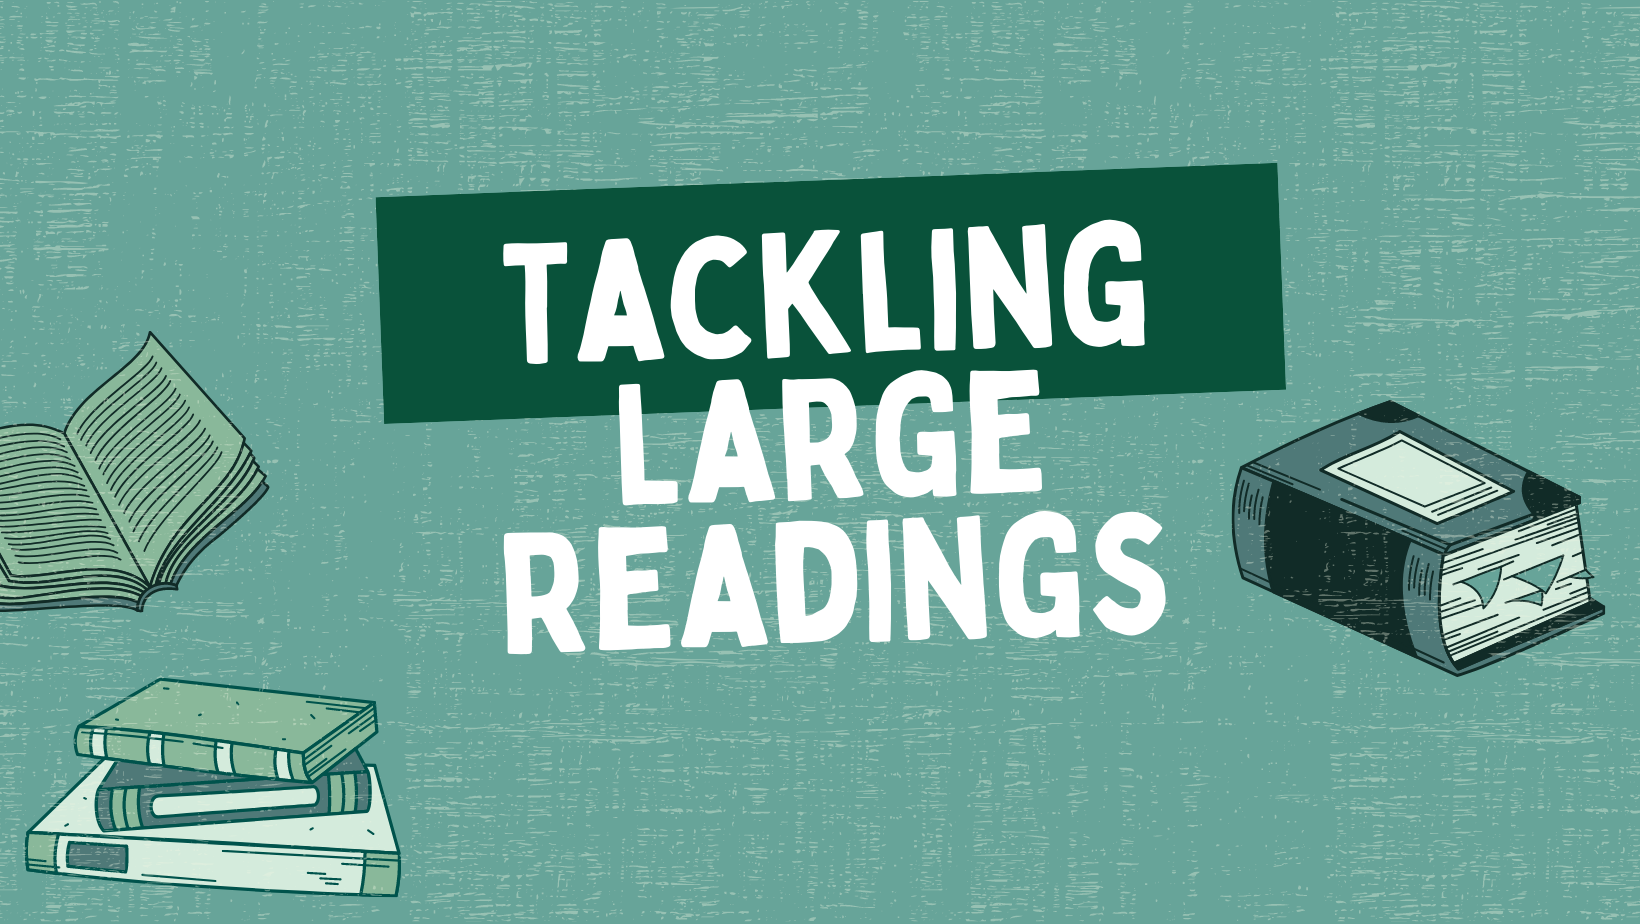 "Tackling Large Readings" on a green background with three green books.